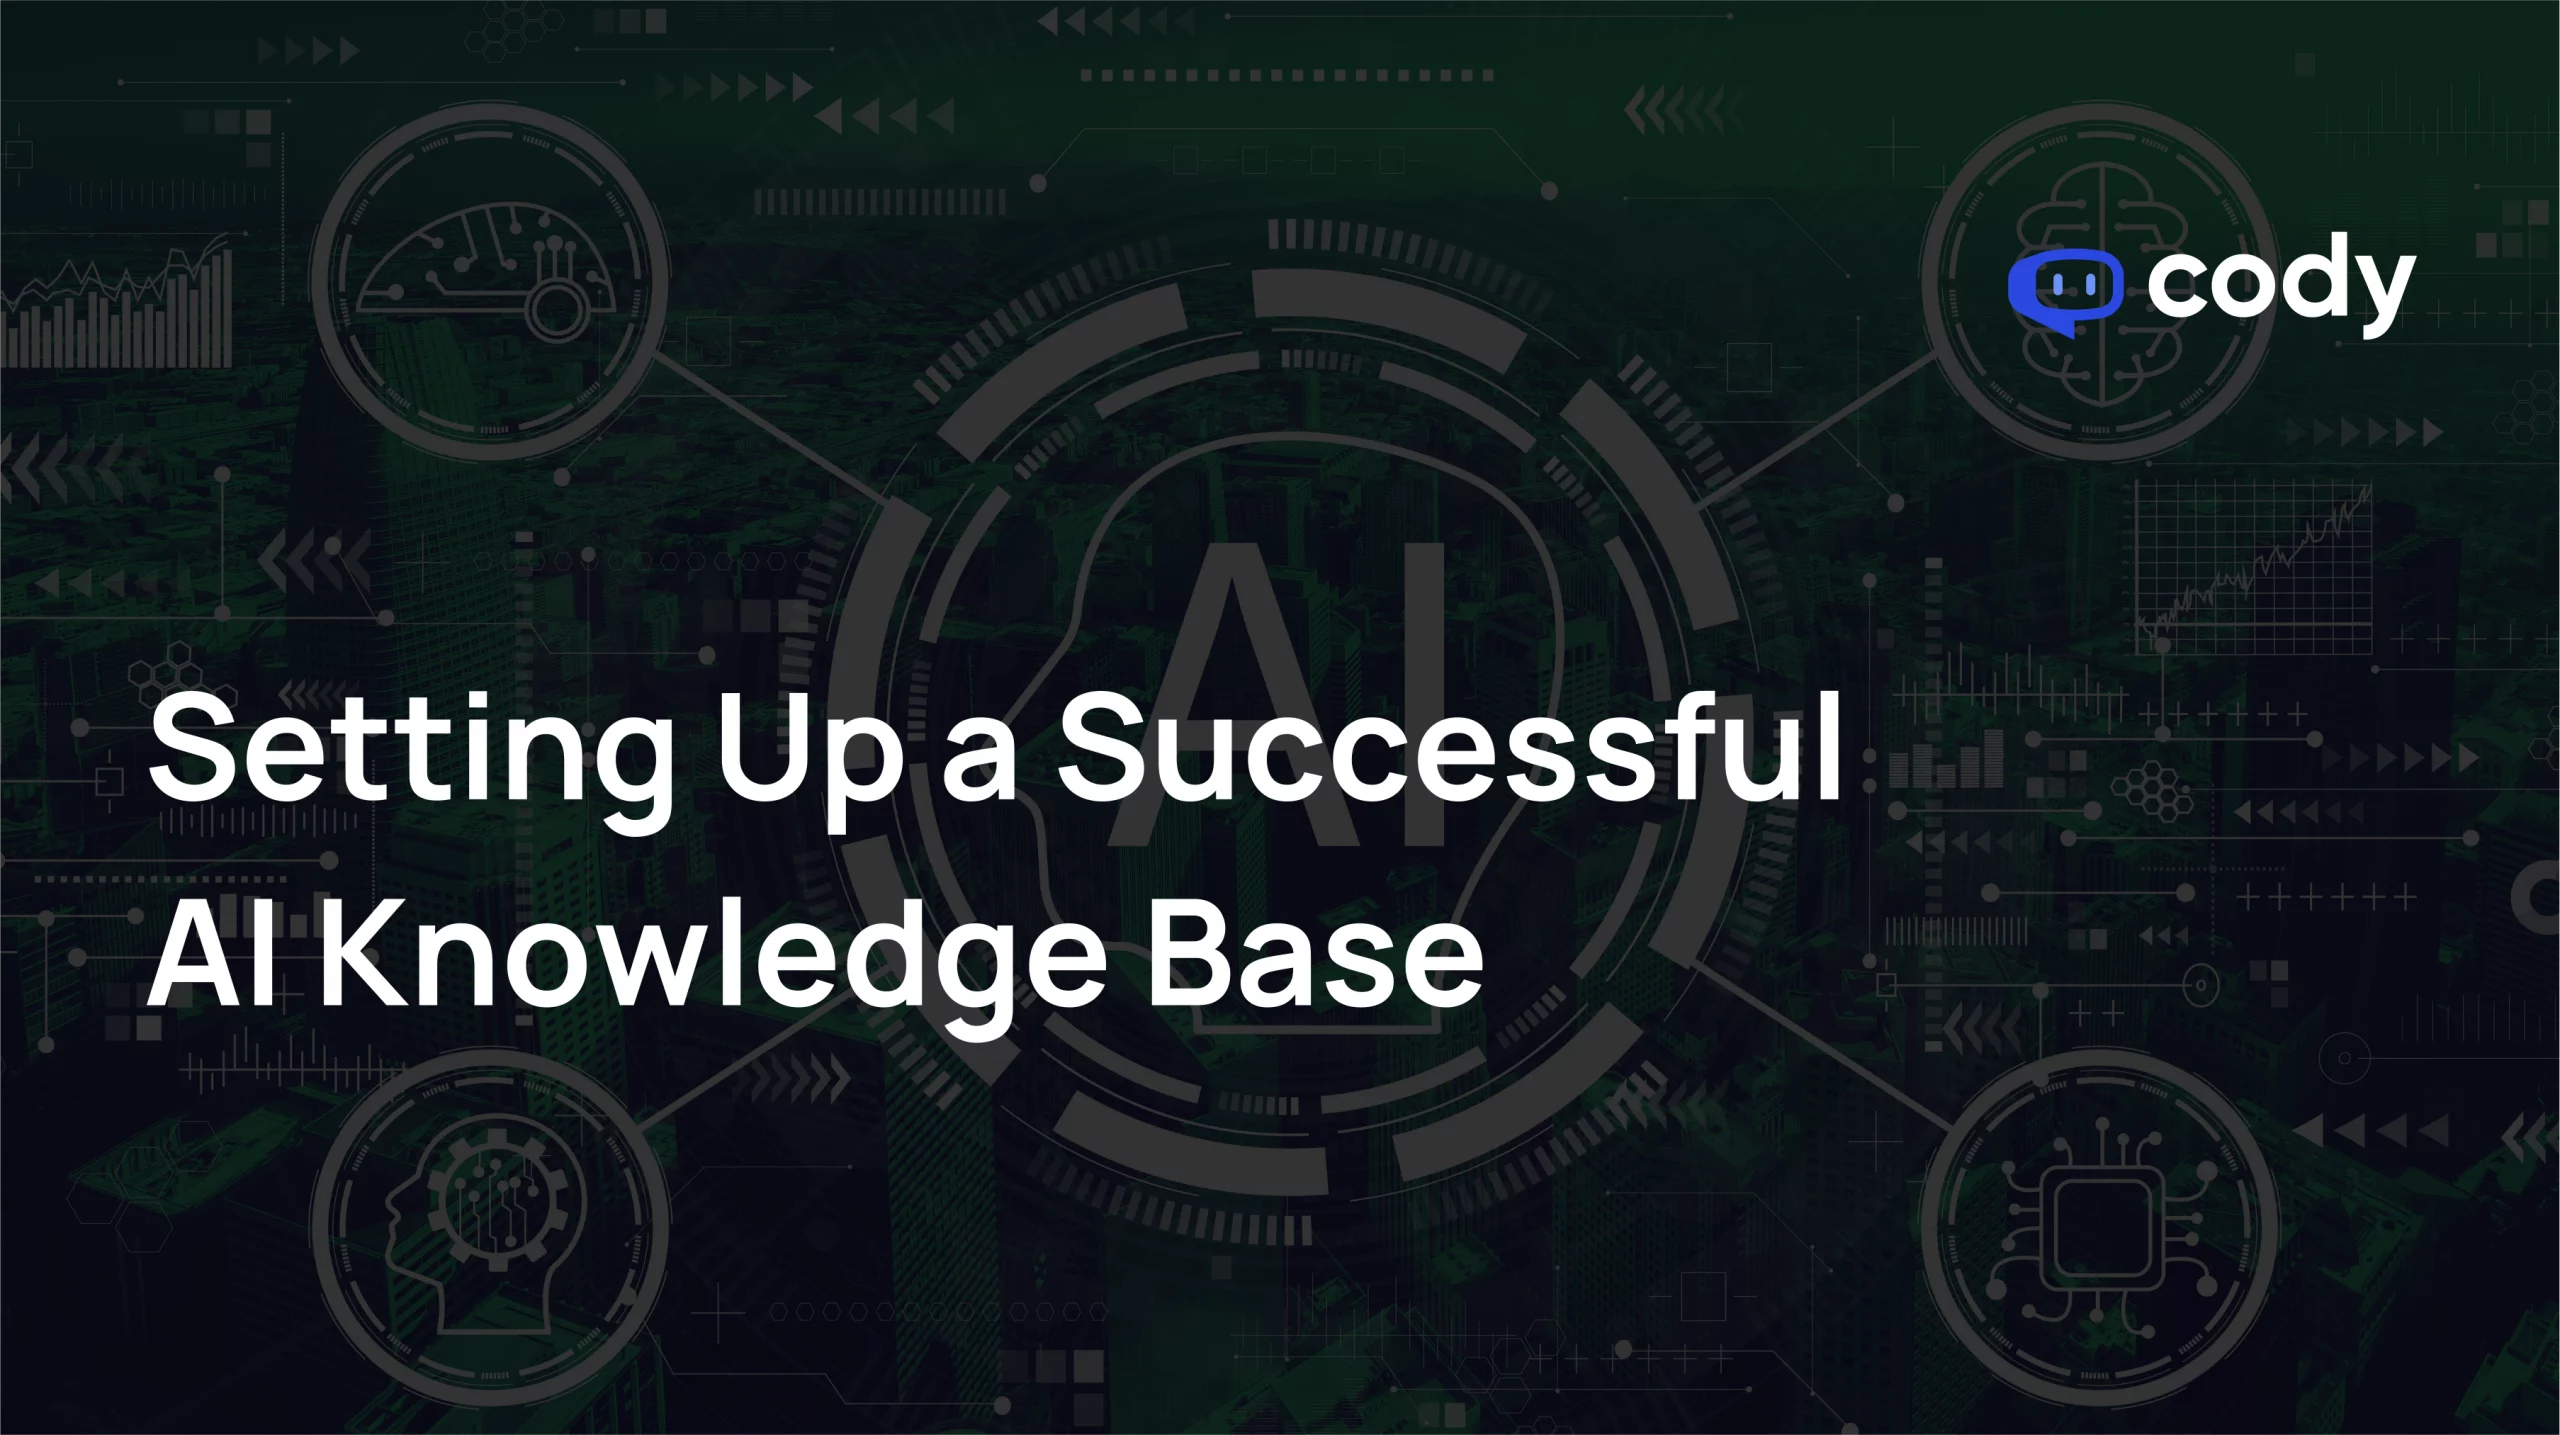 the importance of integrating an AI knowledge base into your customer support ecosystem cannot be ignored.